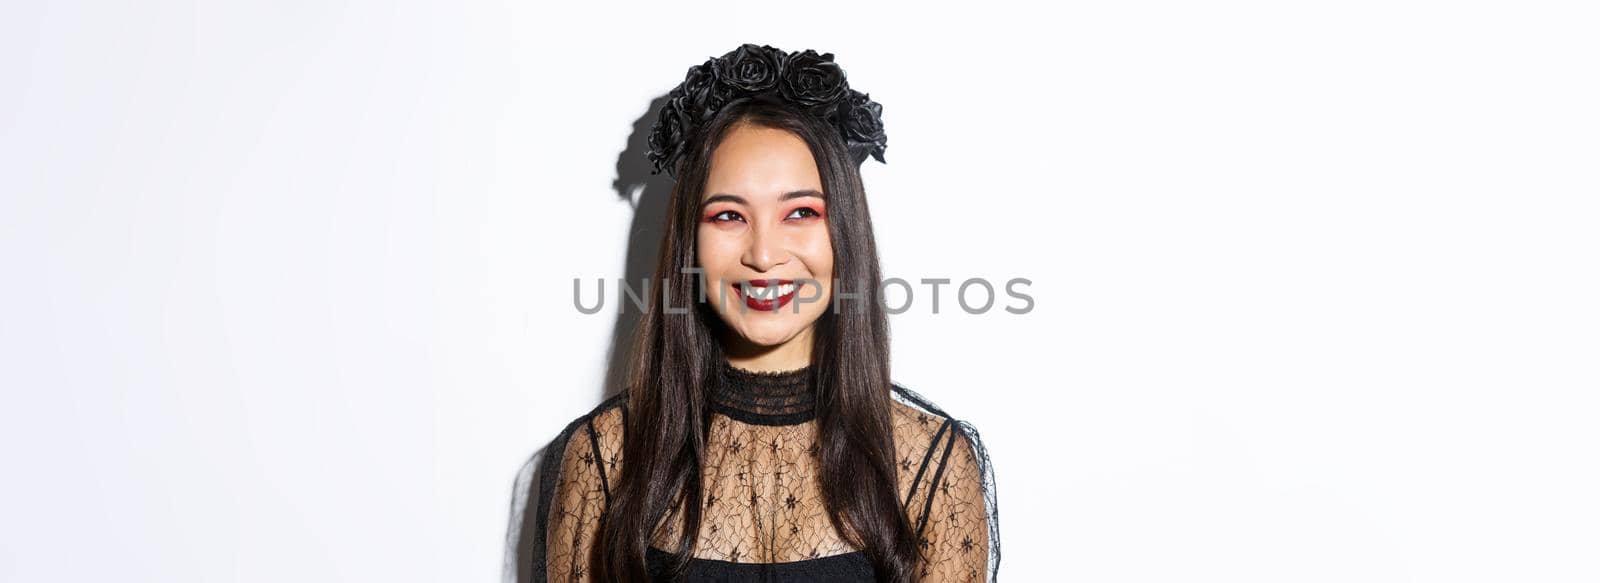 Close-up of beautiful elegant woman in witch costume and gothic makeup, smiling pleased while looking at upper left corner, celebrating halloween.